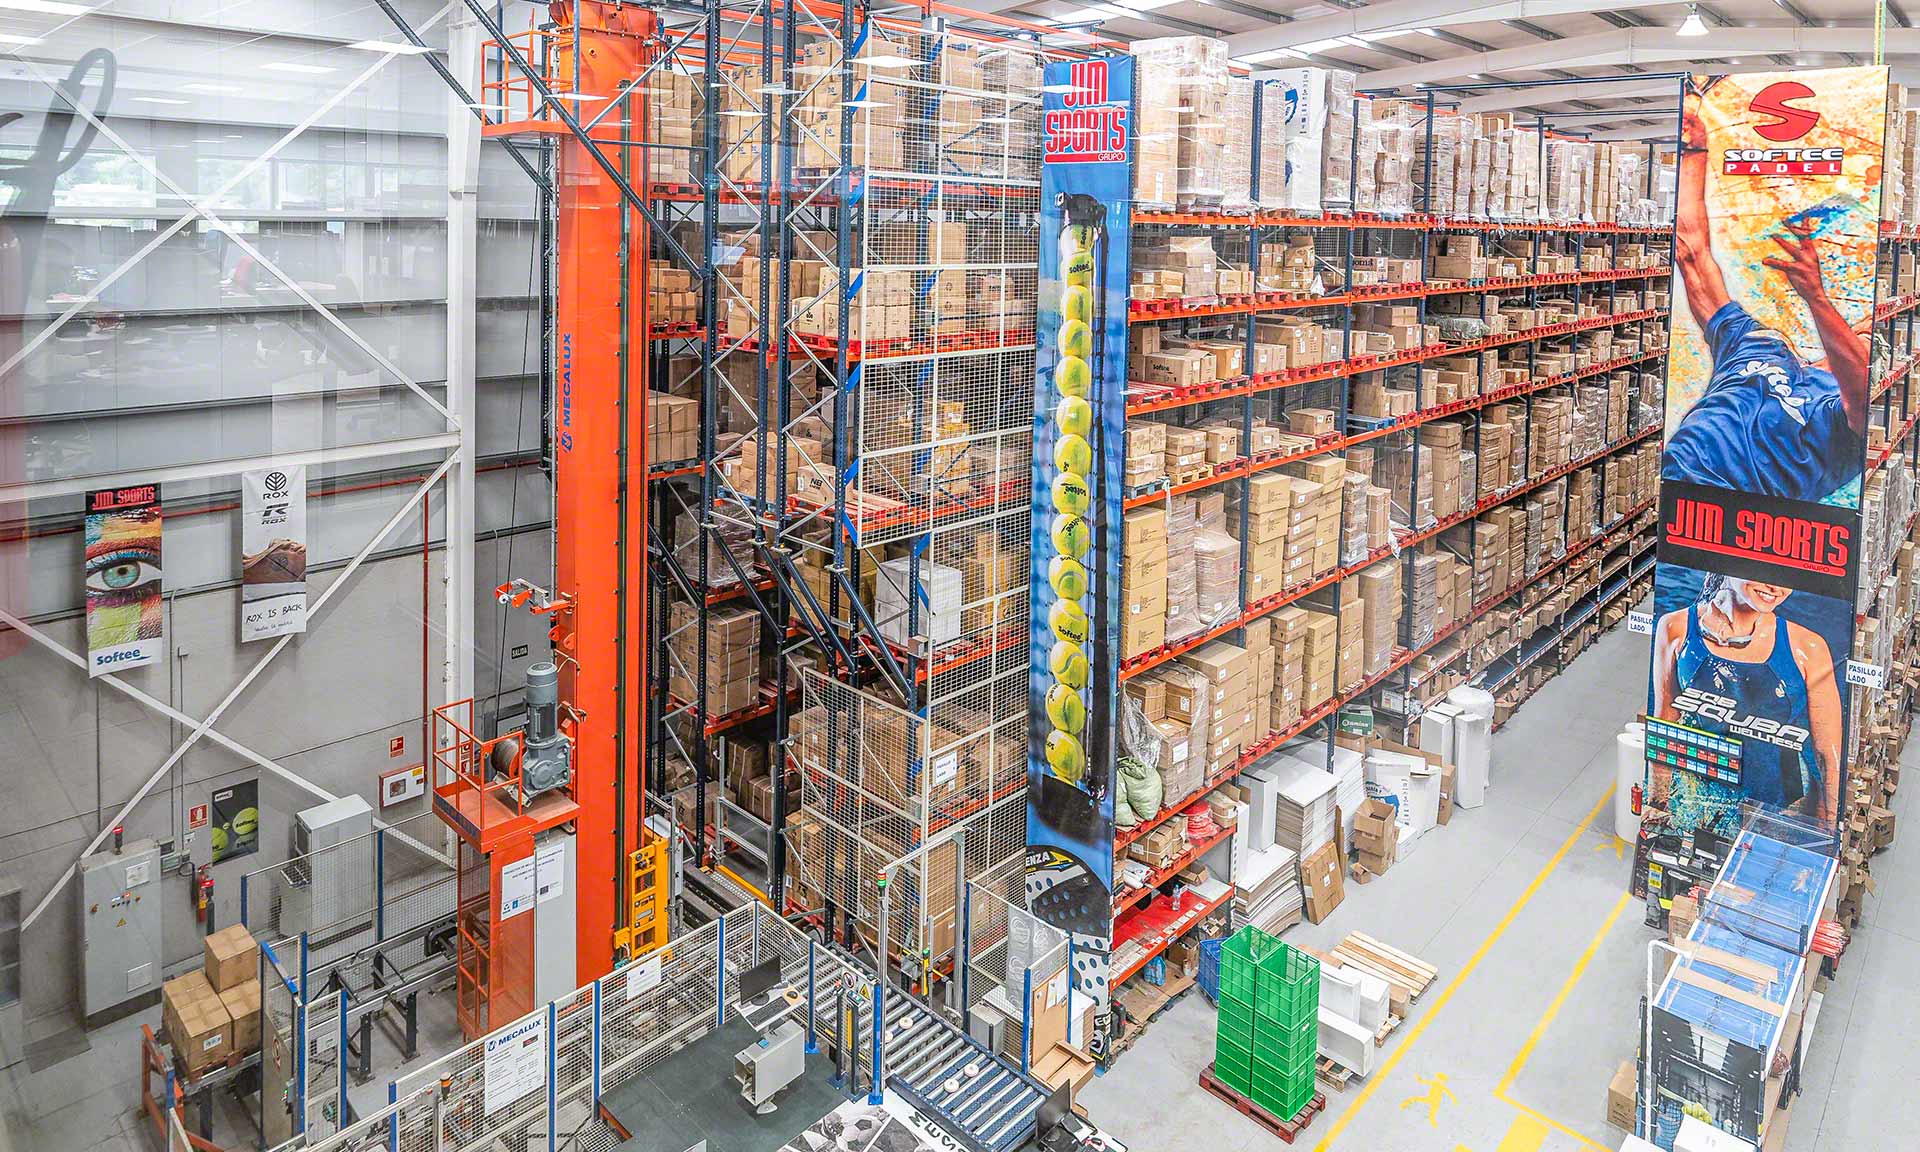 Jim Sports’ facility and its automated aisle with a pallet stacker crane